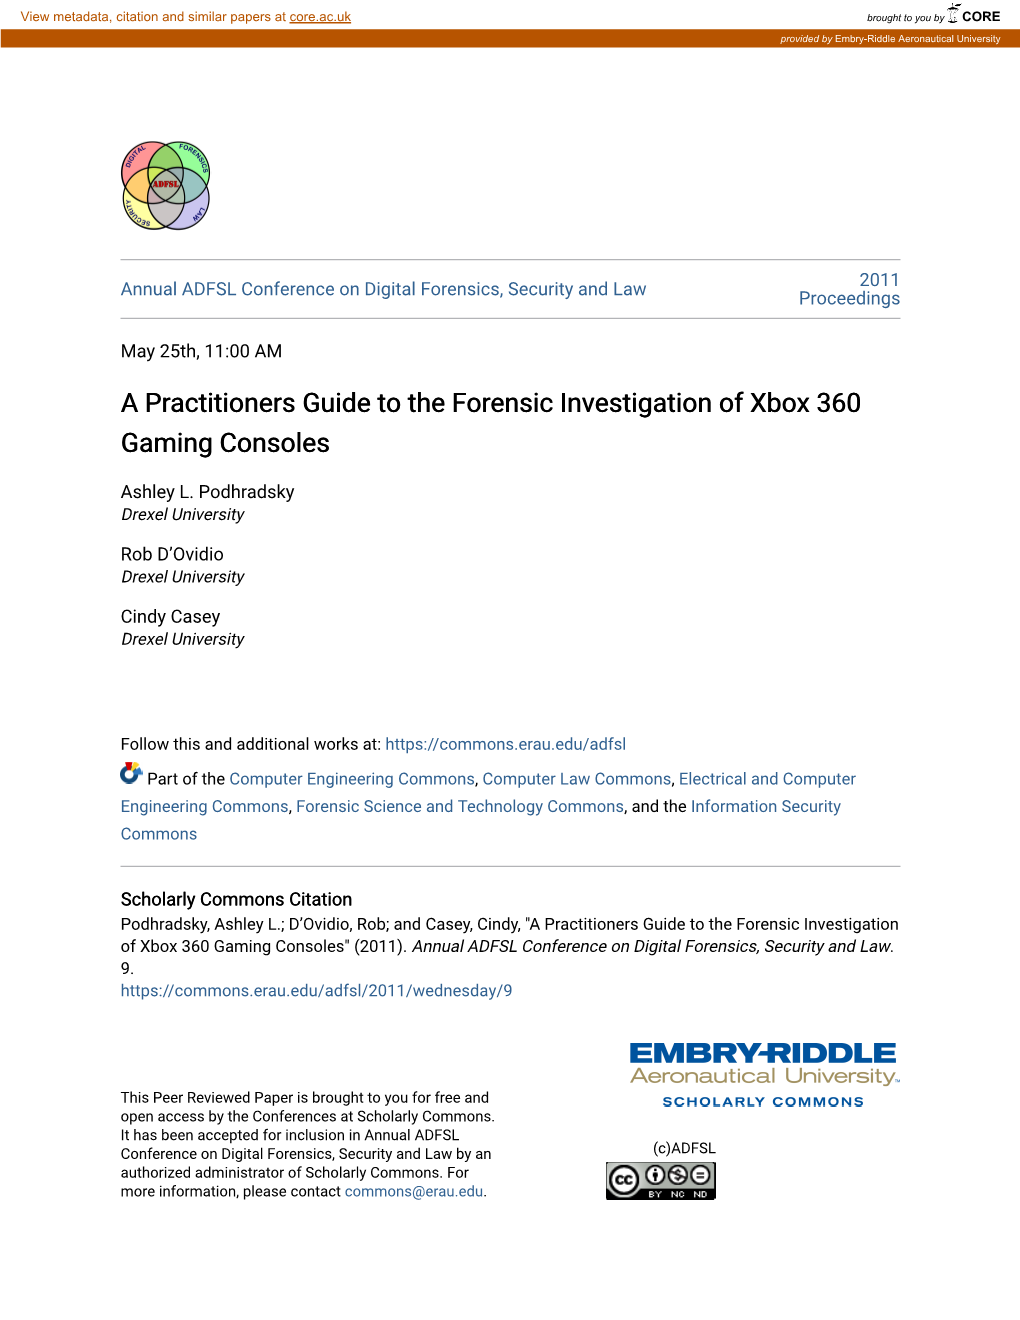 A Practitioners Guide to the Forensic Investigation of Xbox 360 Gaming Consoles